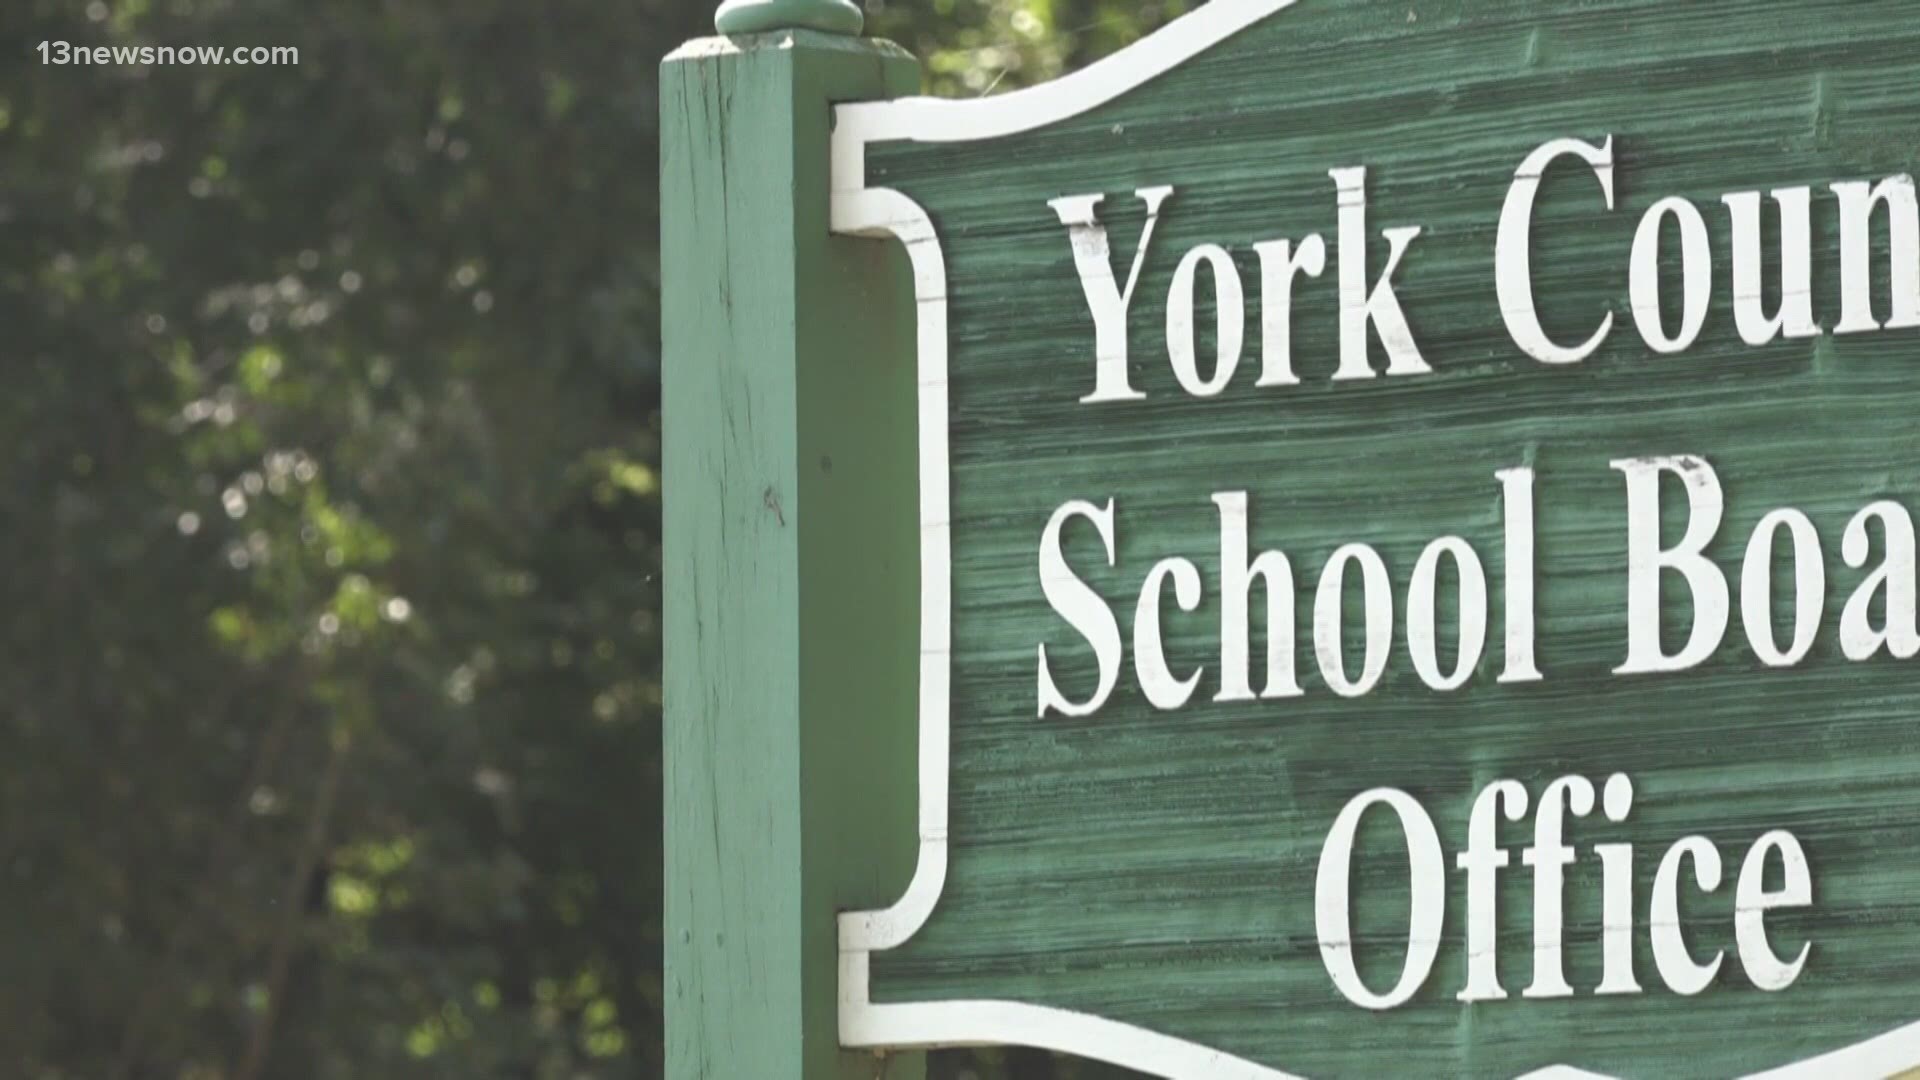 Many York County teachers are vaccinated, but with the number of students who are signed up to return to in-person classes, the district needs to stagger attendance.